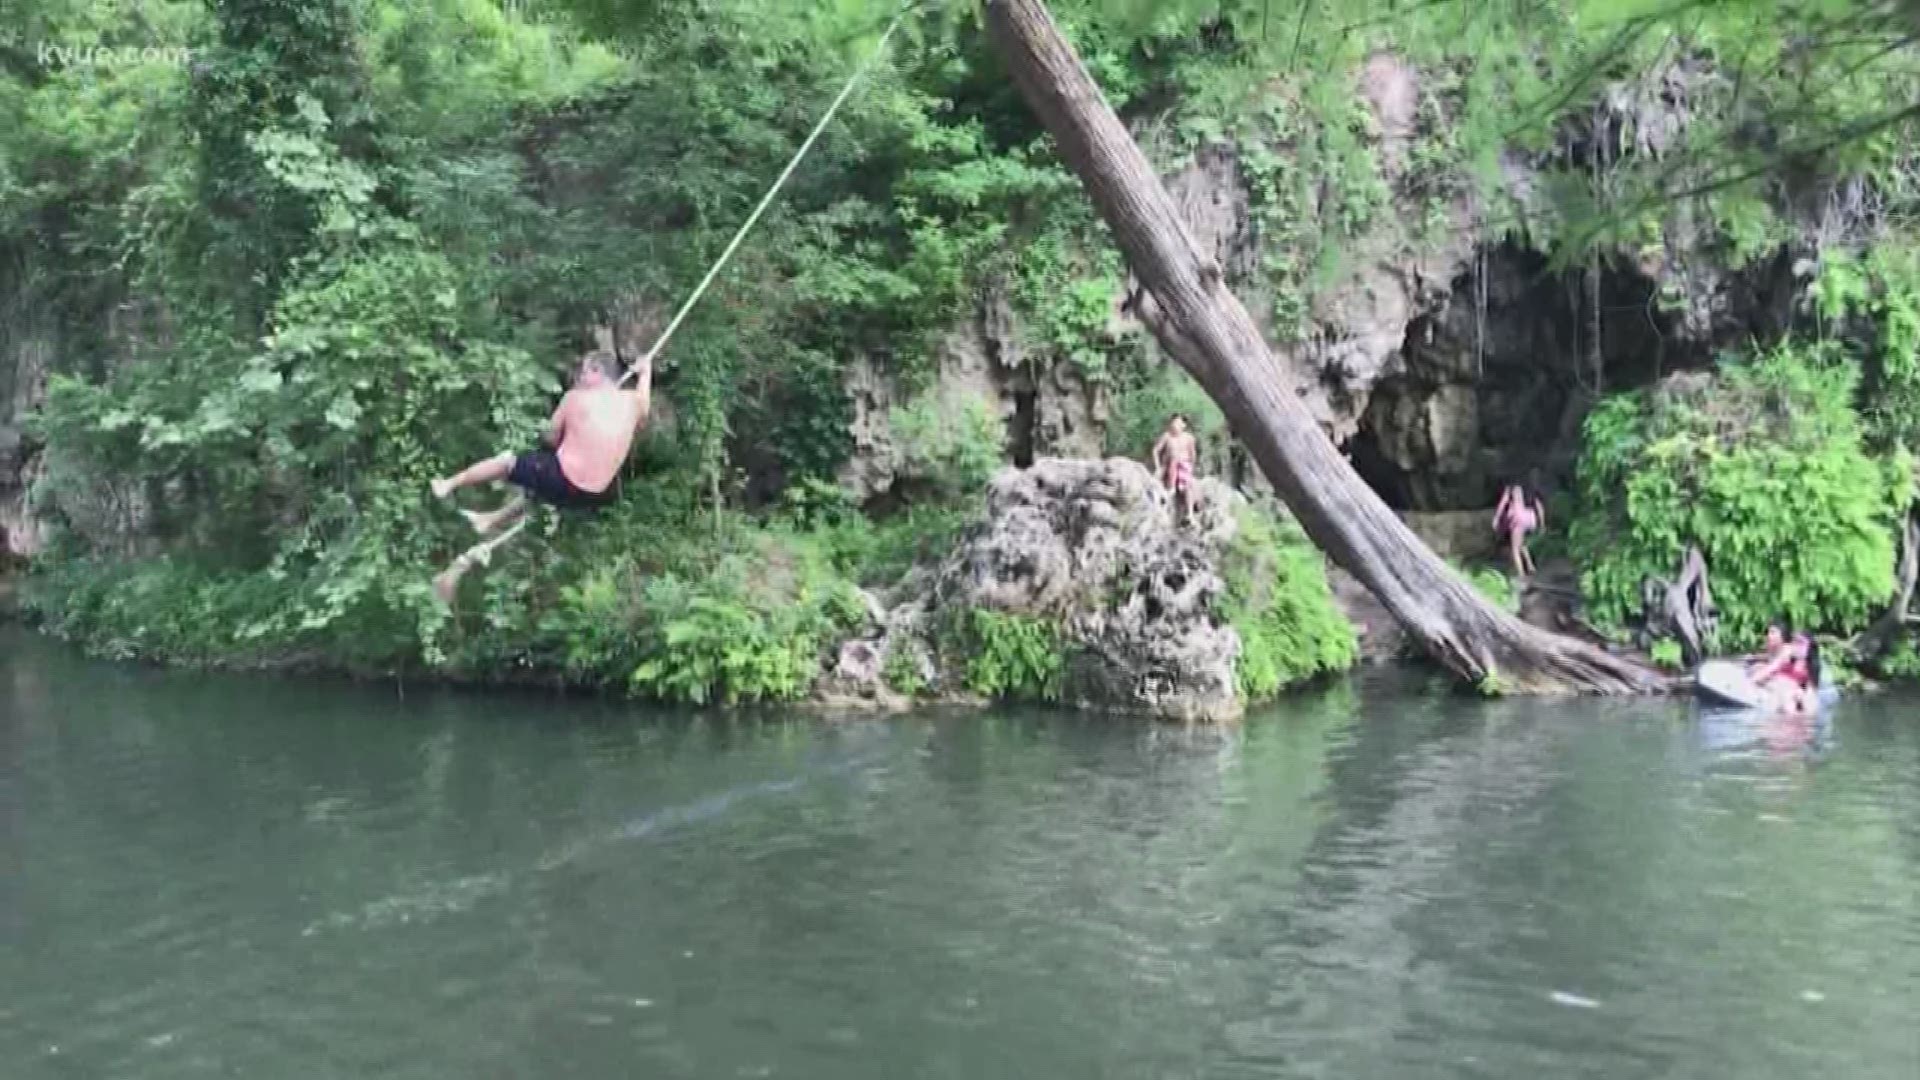 "Albert's Texas Treasures" takes you to one of the coolest swimming holes in the Lone Star State!